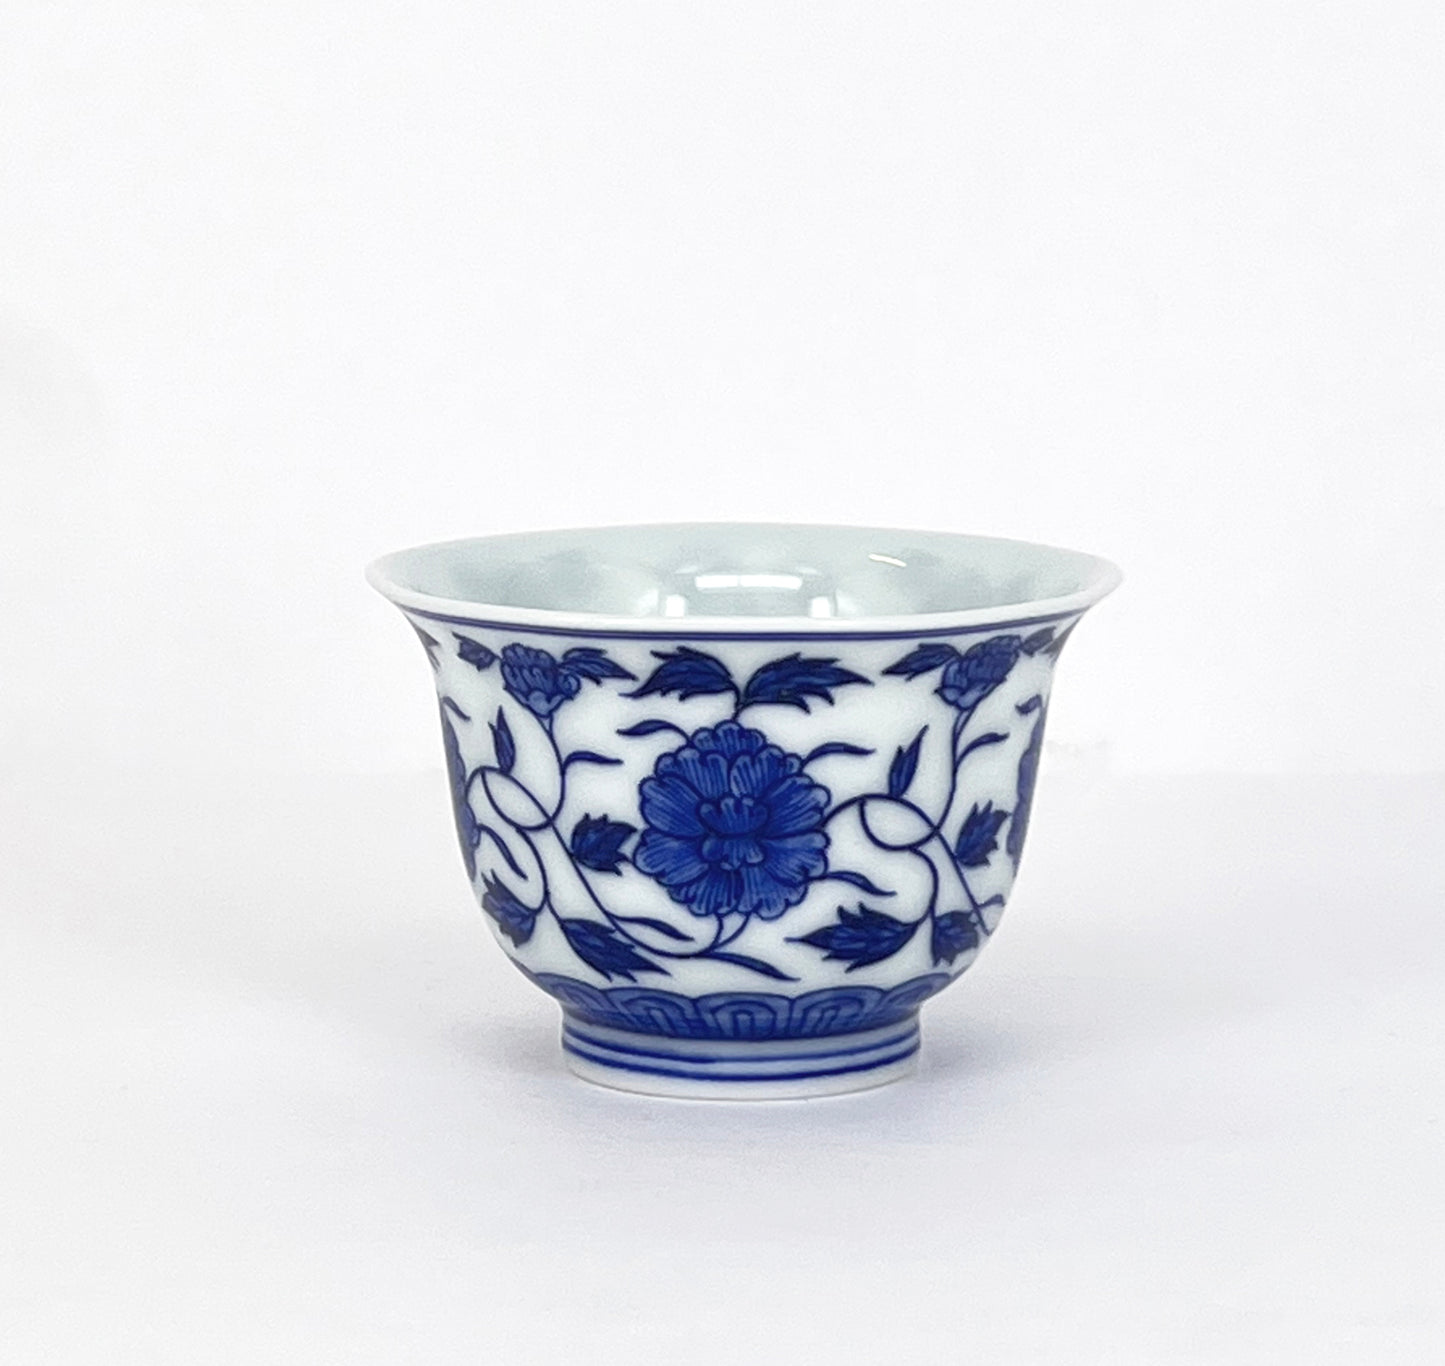 Chunfengxiangyu: Blue and White Bell Cup with Interlocking Lotus Branches｜春风祥玉：青花缠枝莲小铃铛杯